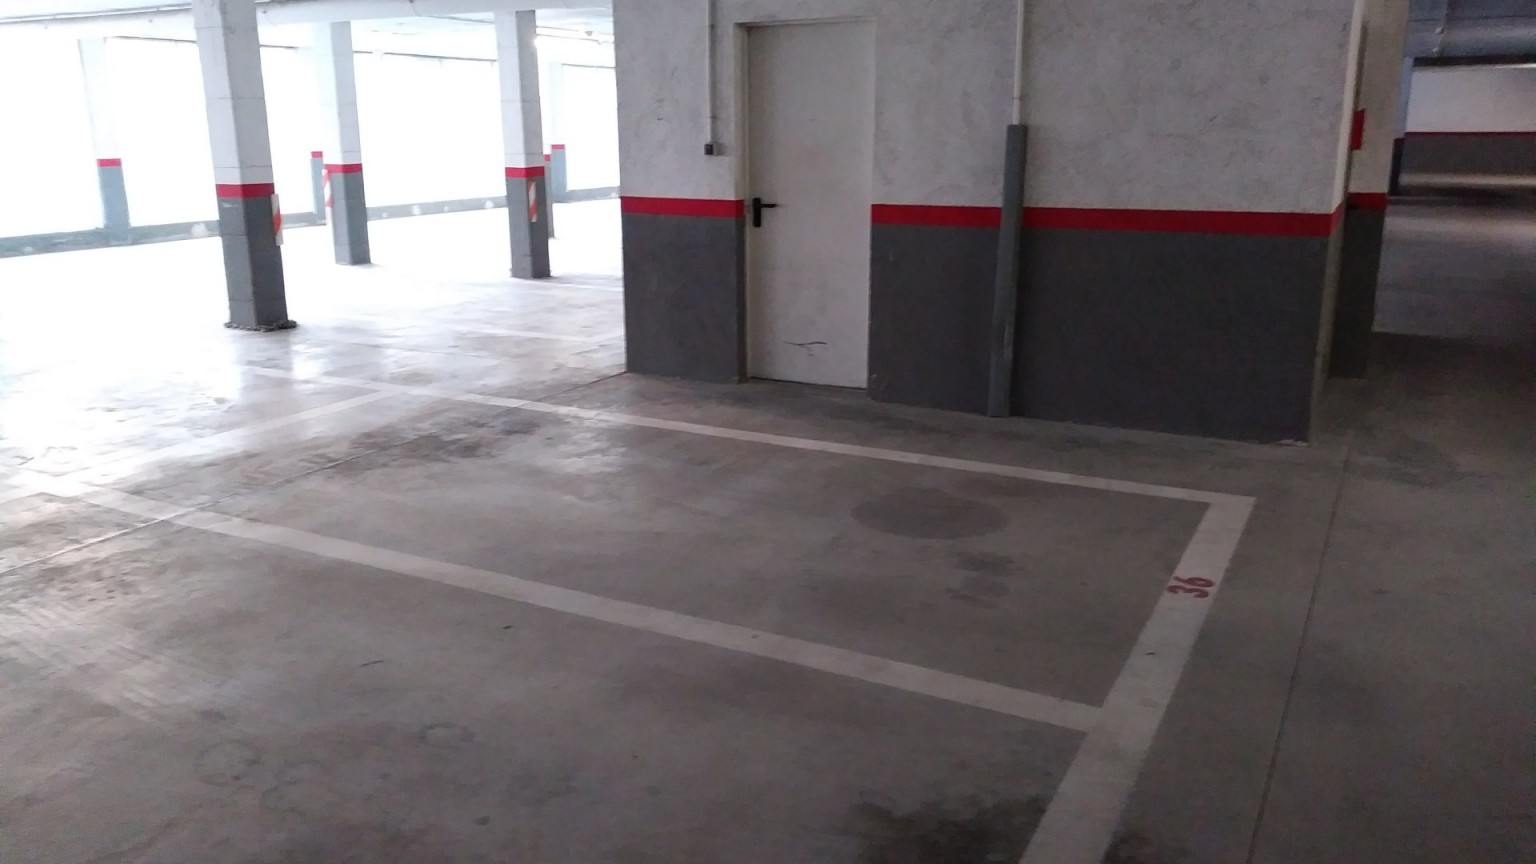 Parking space for sale. Sup 9.90m².